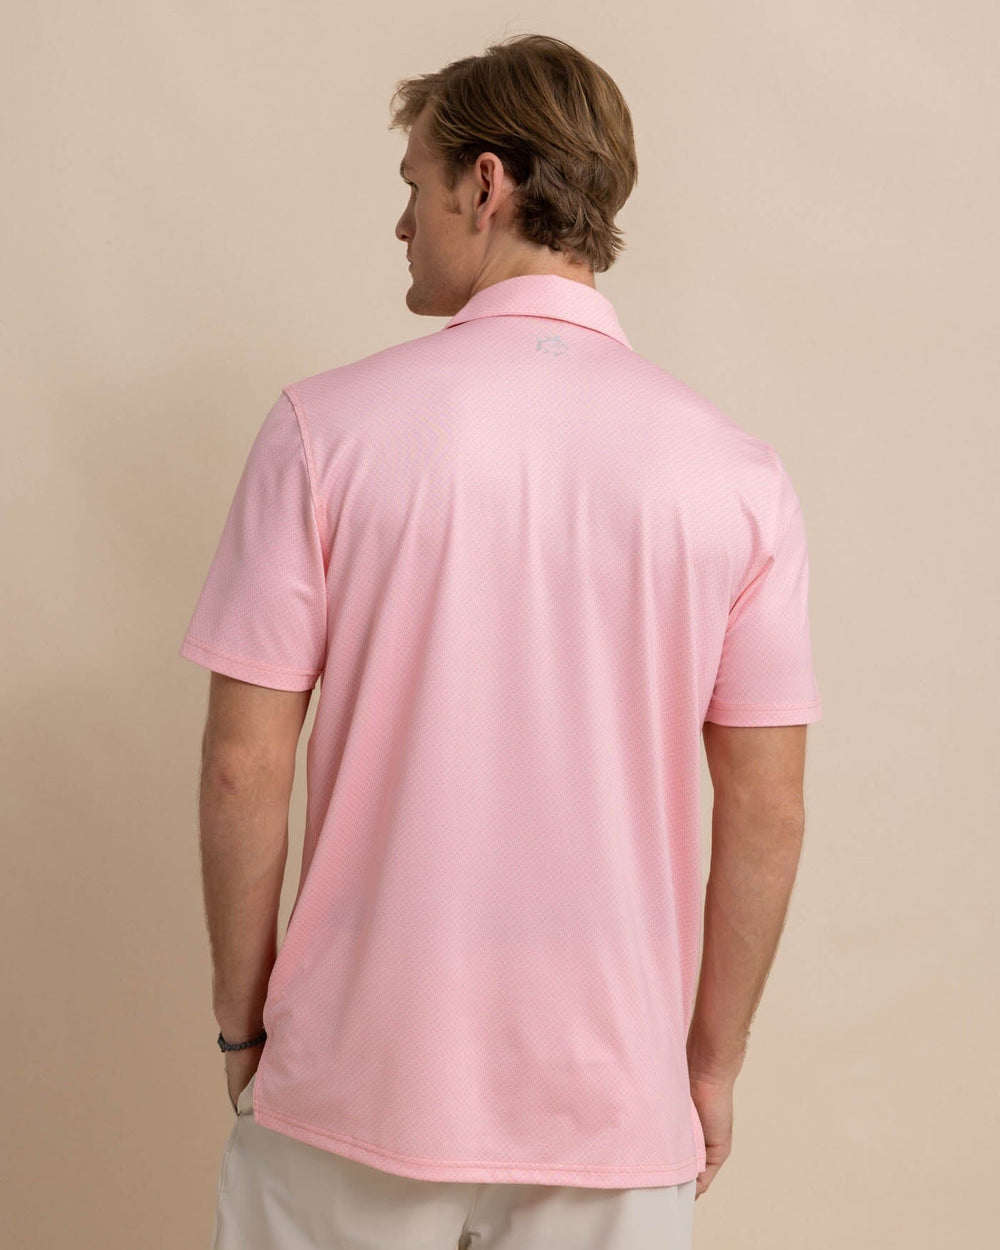 The back view of the Southern Tide Driver Coastal Geo Polo Shirt by Southern Tide - Flamingo Pink